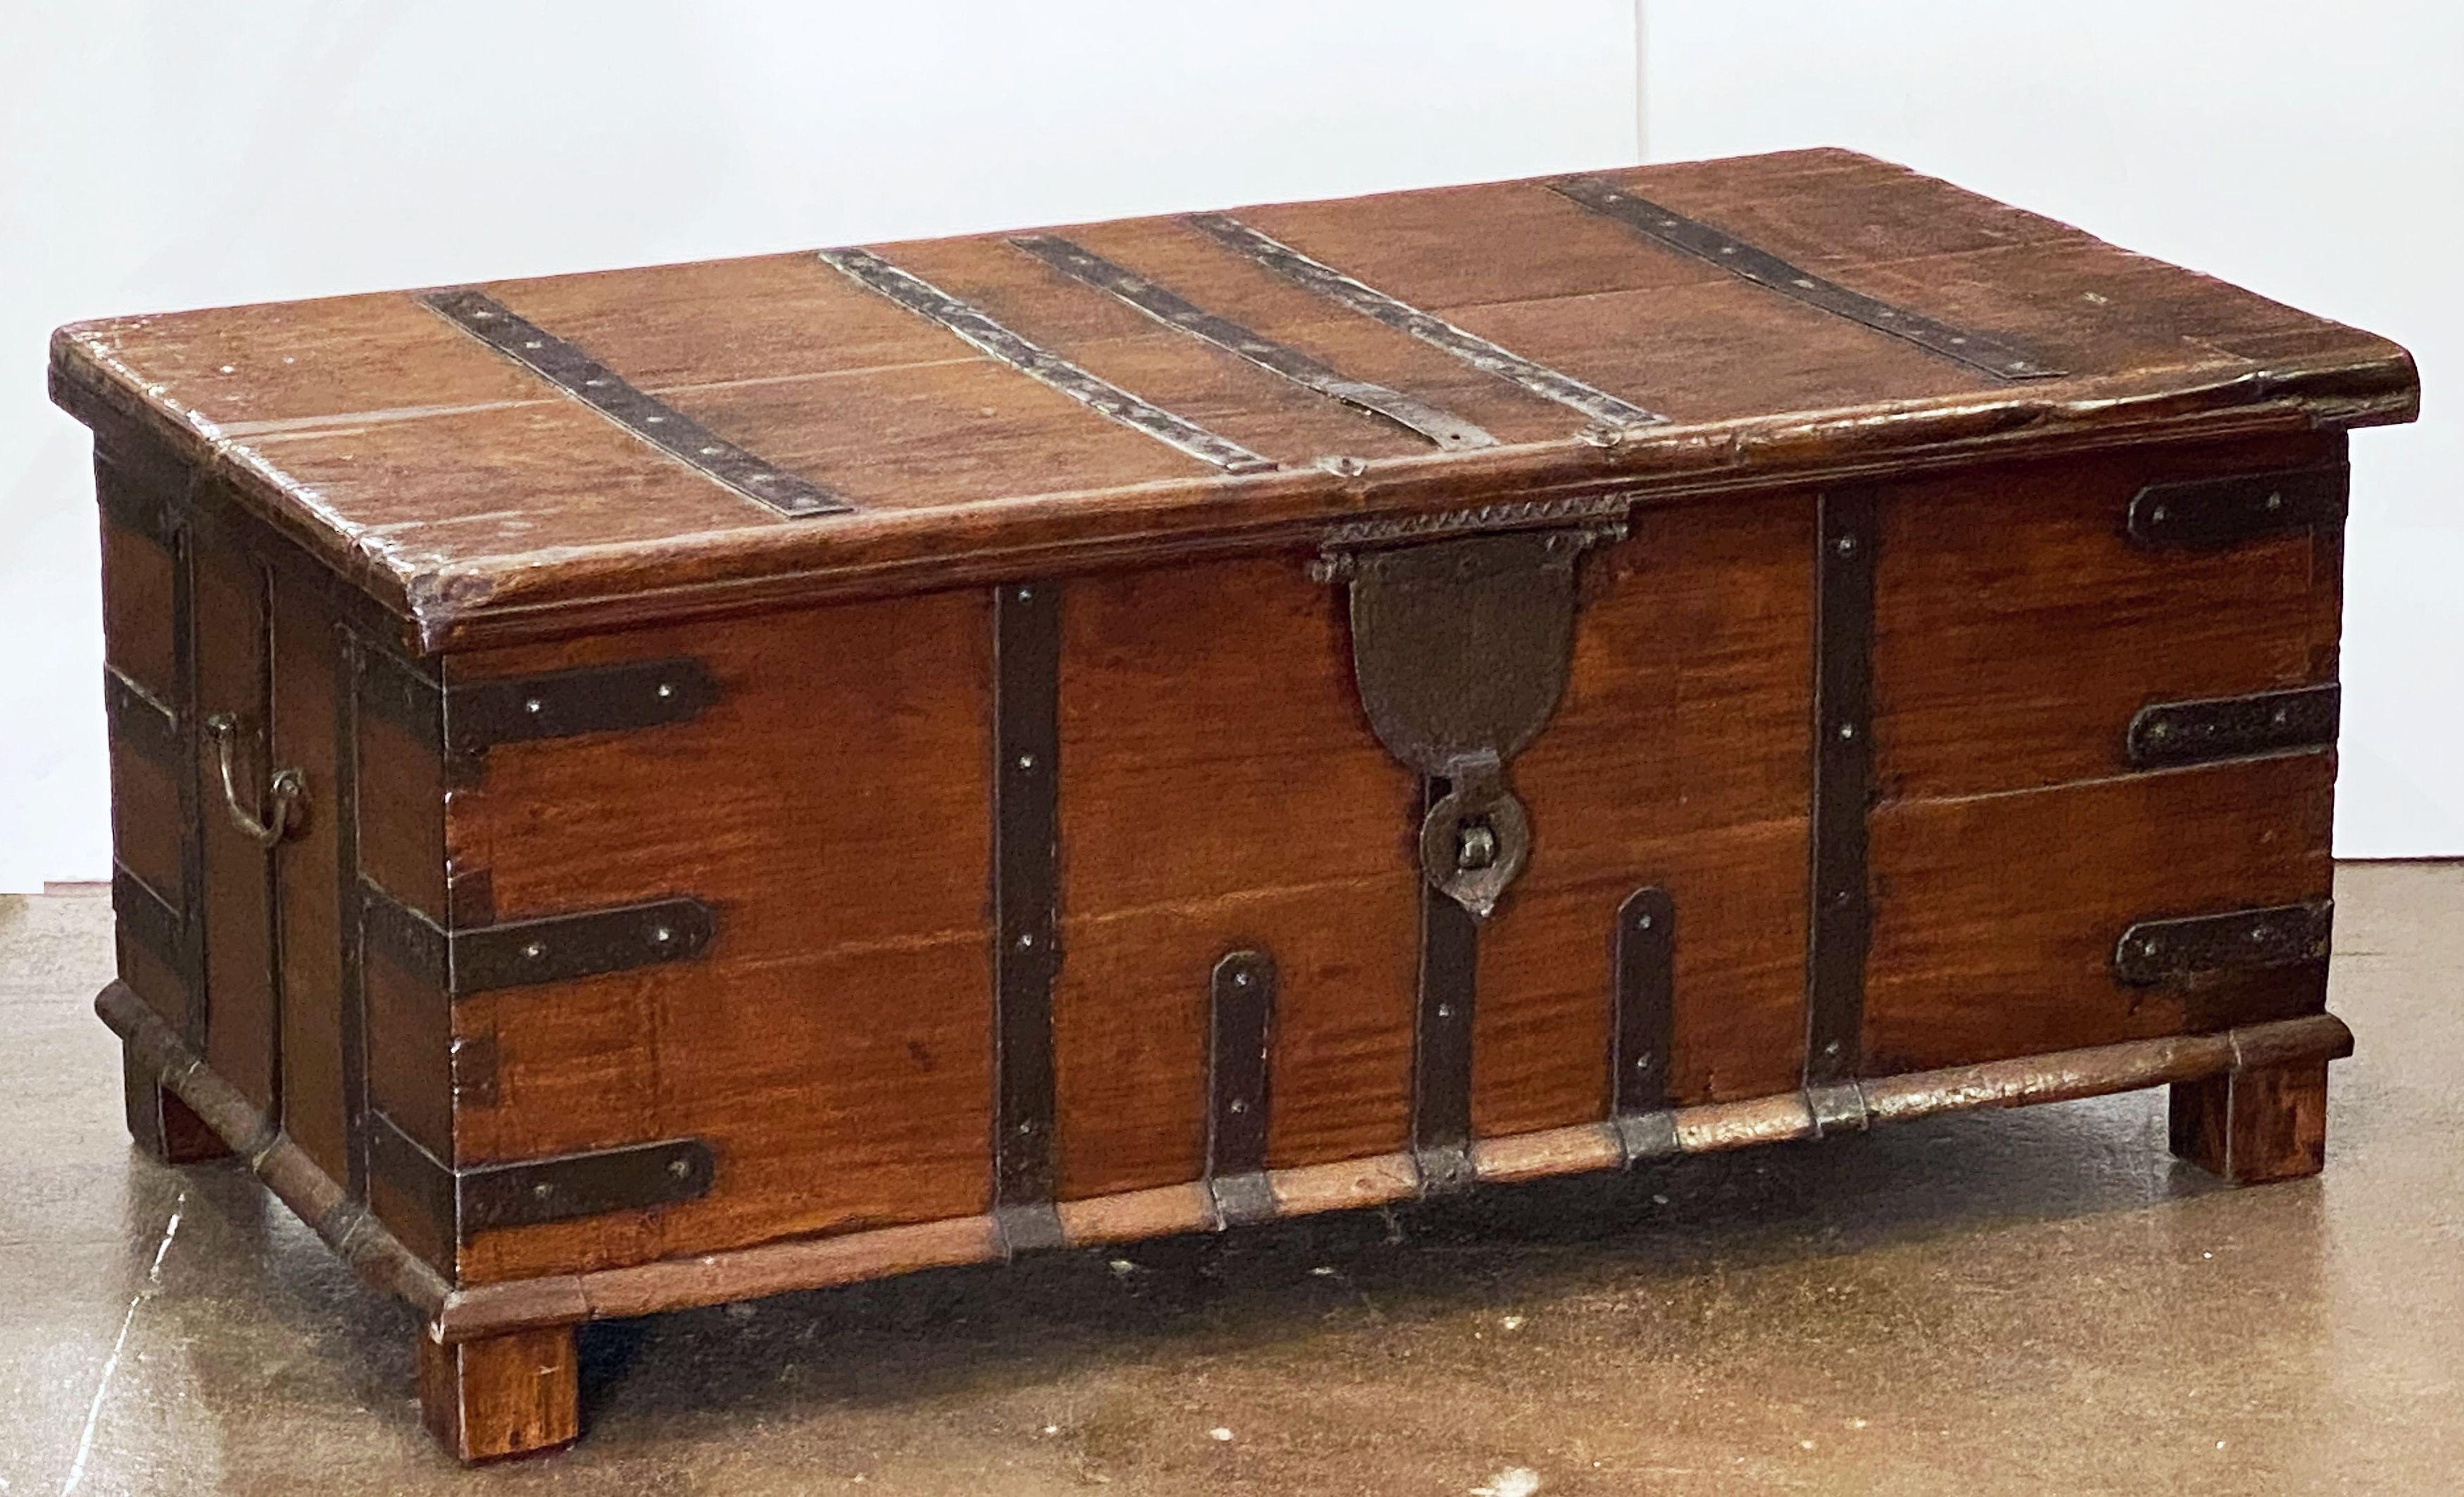 Metal Large Rajasthan Trunk of Iron and Teak from British Colonial India 'The Raj'